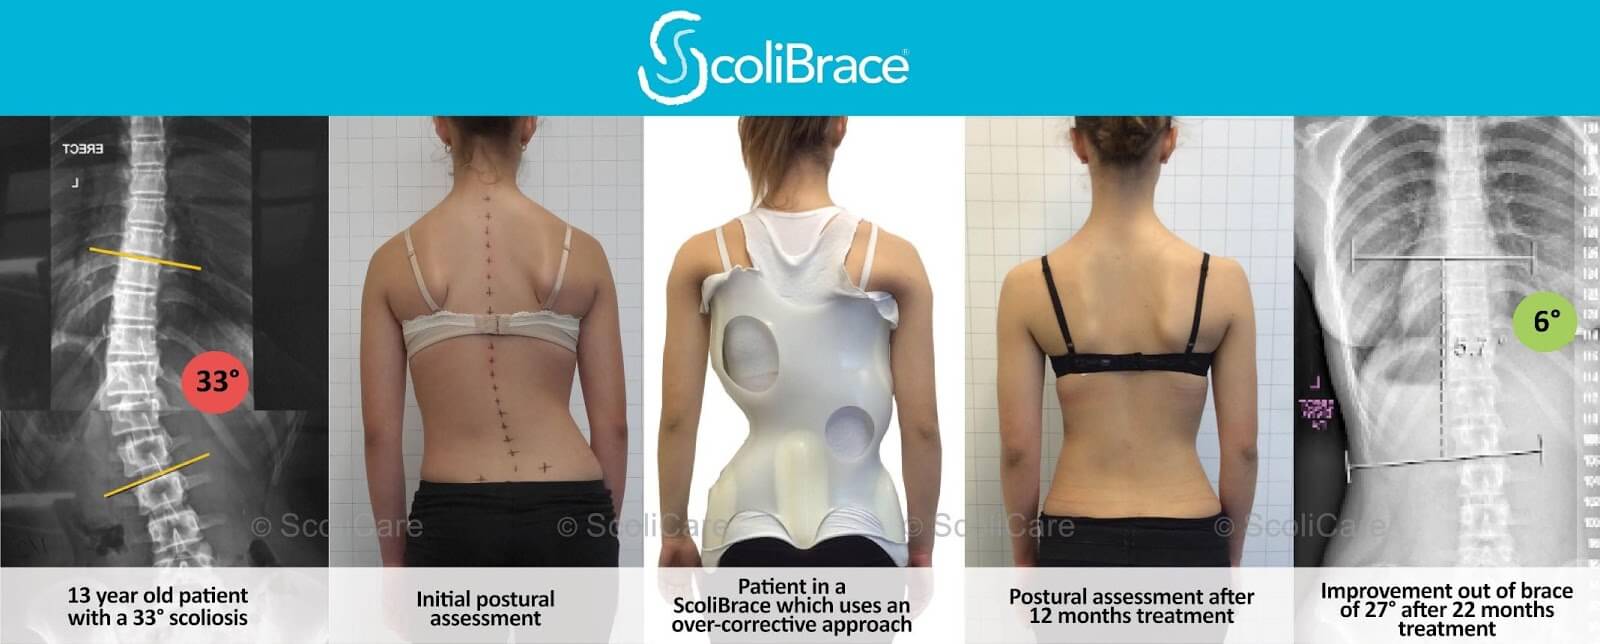 Brace related stress in scoliosis patients – Comparison of